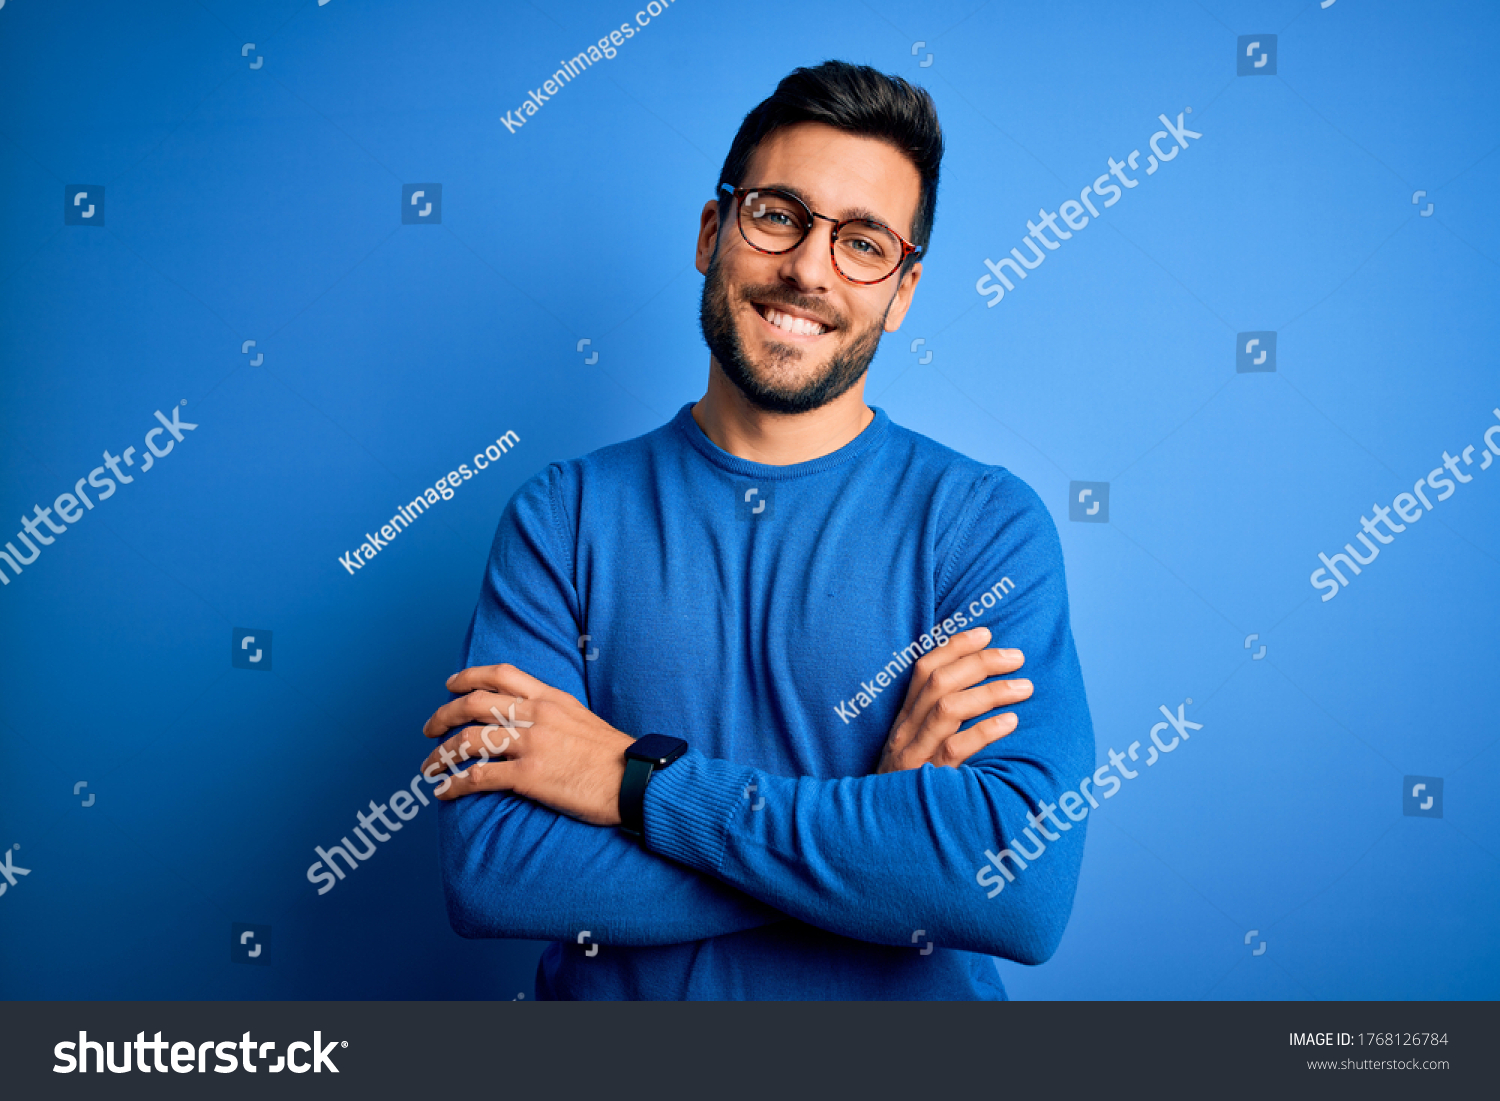 Young handsome man with beard wearing casual sweater and glasses over blue background happy face smiling with crossed arms looking at the camera. Positive person. #1768126784